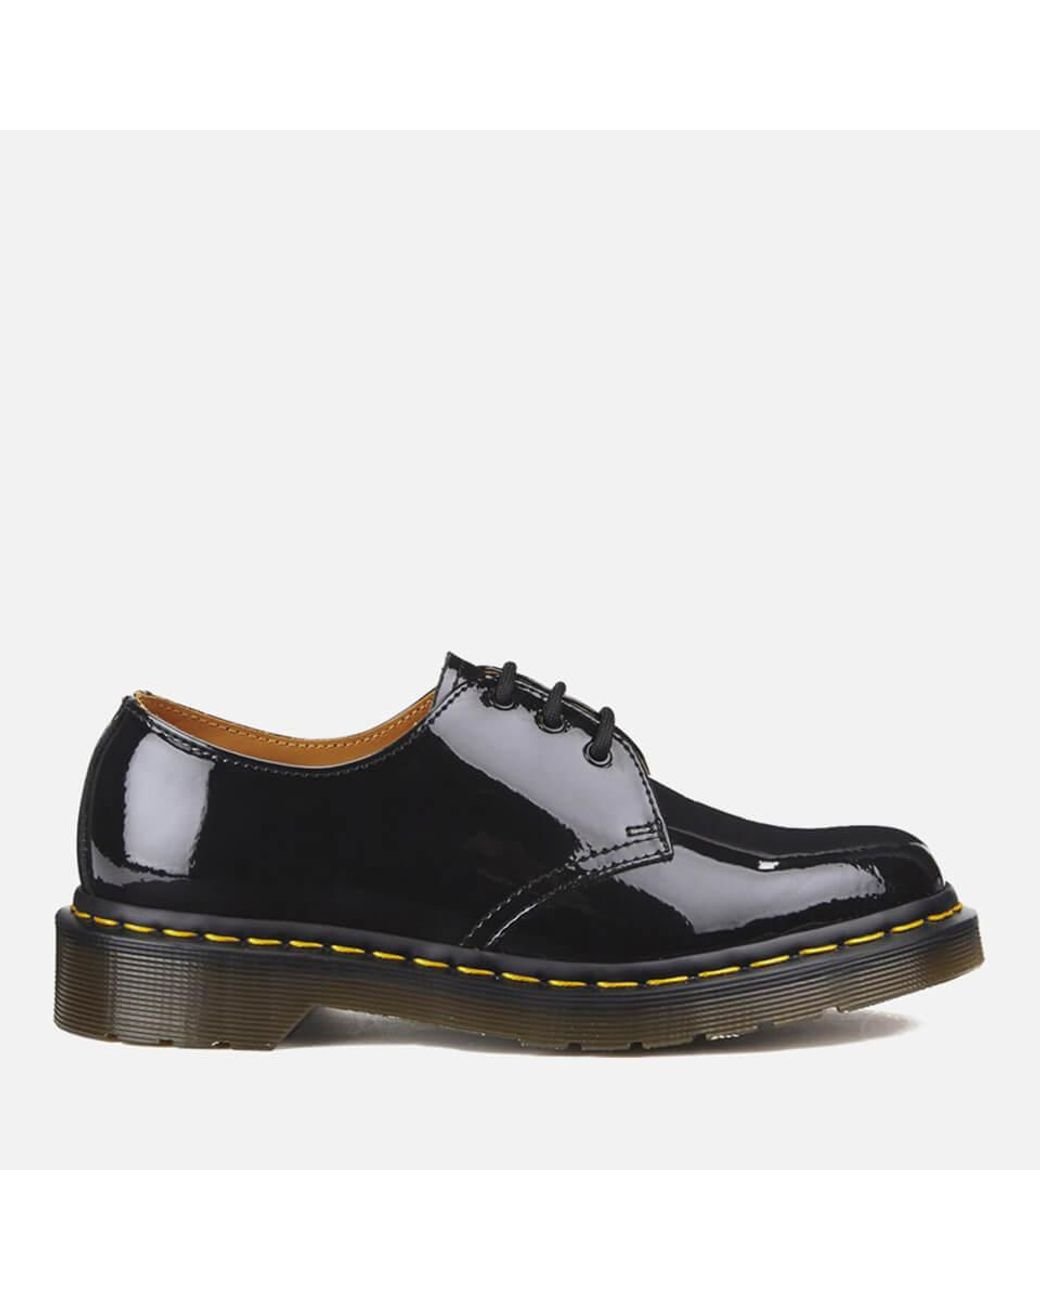 Dr. Martens Leather 1461 Patent Lamper 3-eye Shoes in Black - Lyst